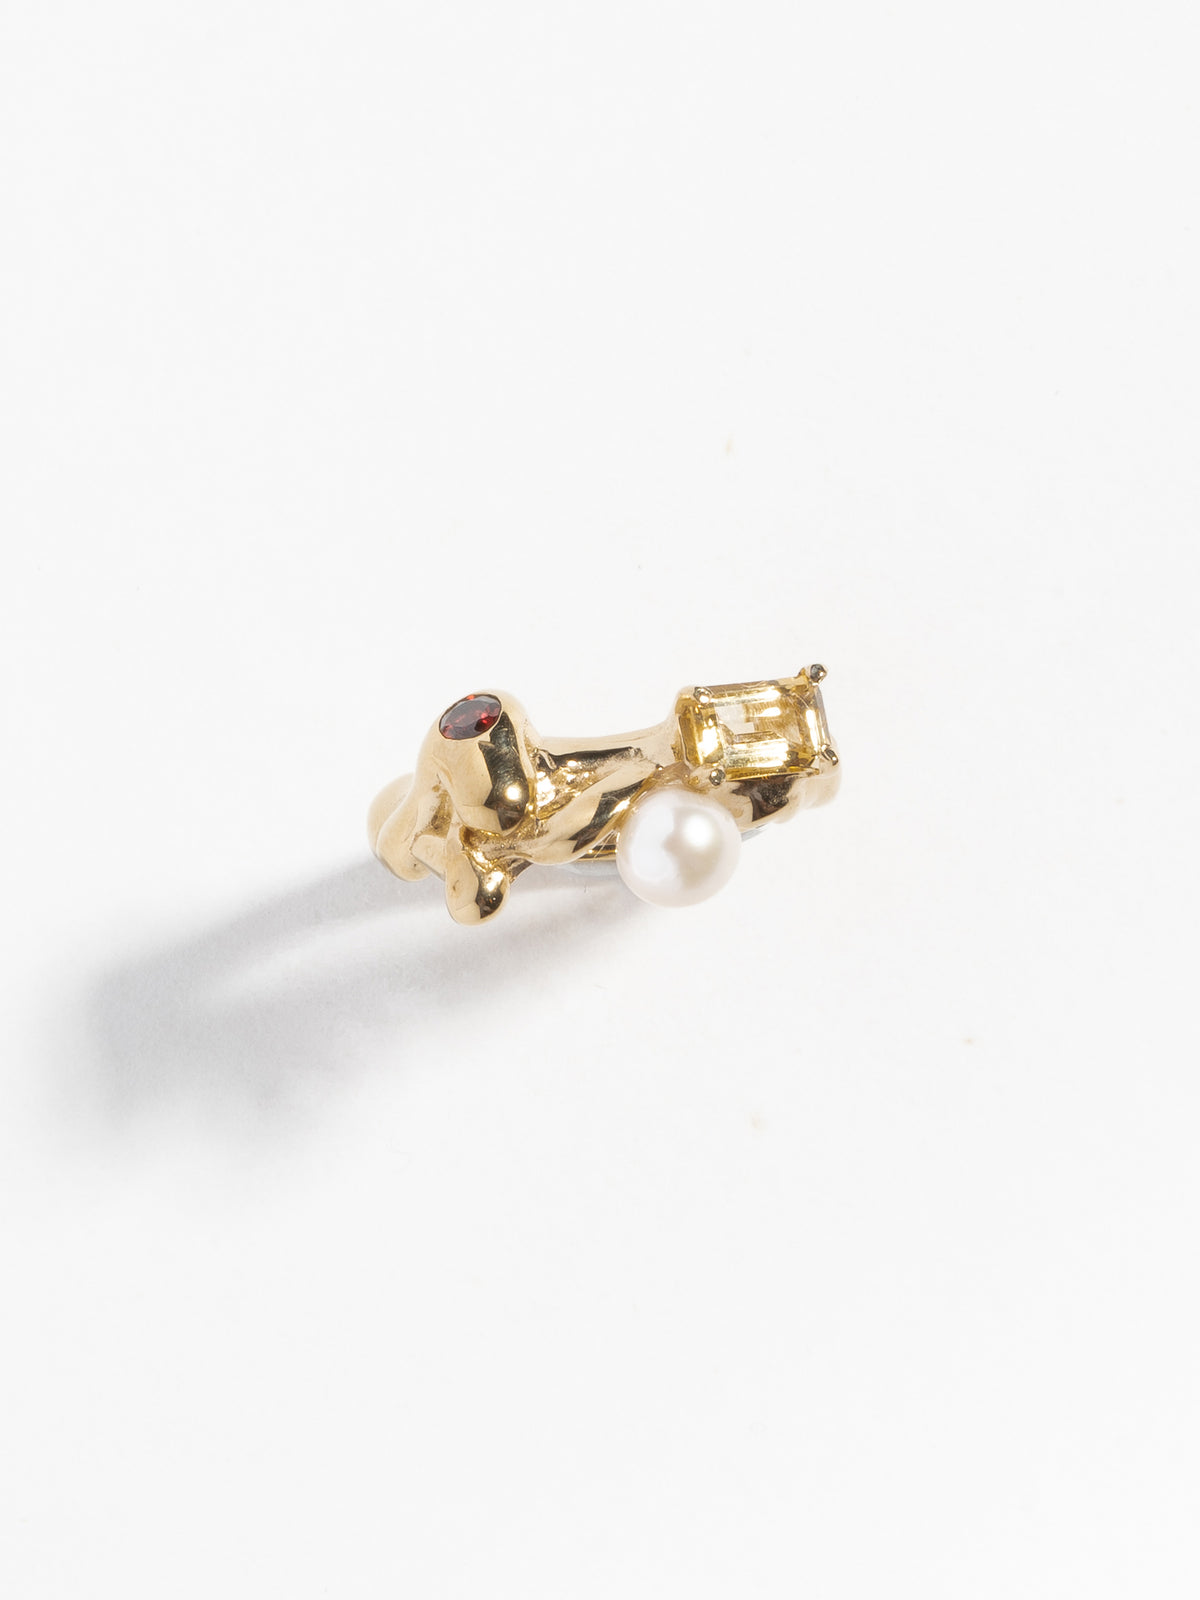 Product image of FARIS MENAGE Ring in gold-plated bronze with prong-set emerald-cut citrine, flush-set round, diamond-cut garnet, and a freshwater pearl. Front view.